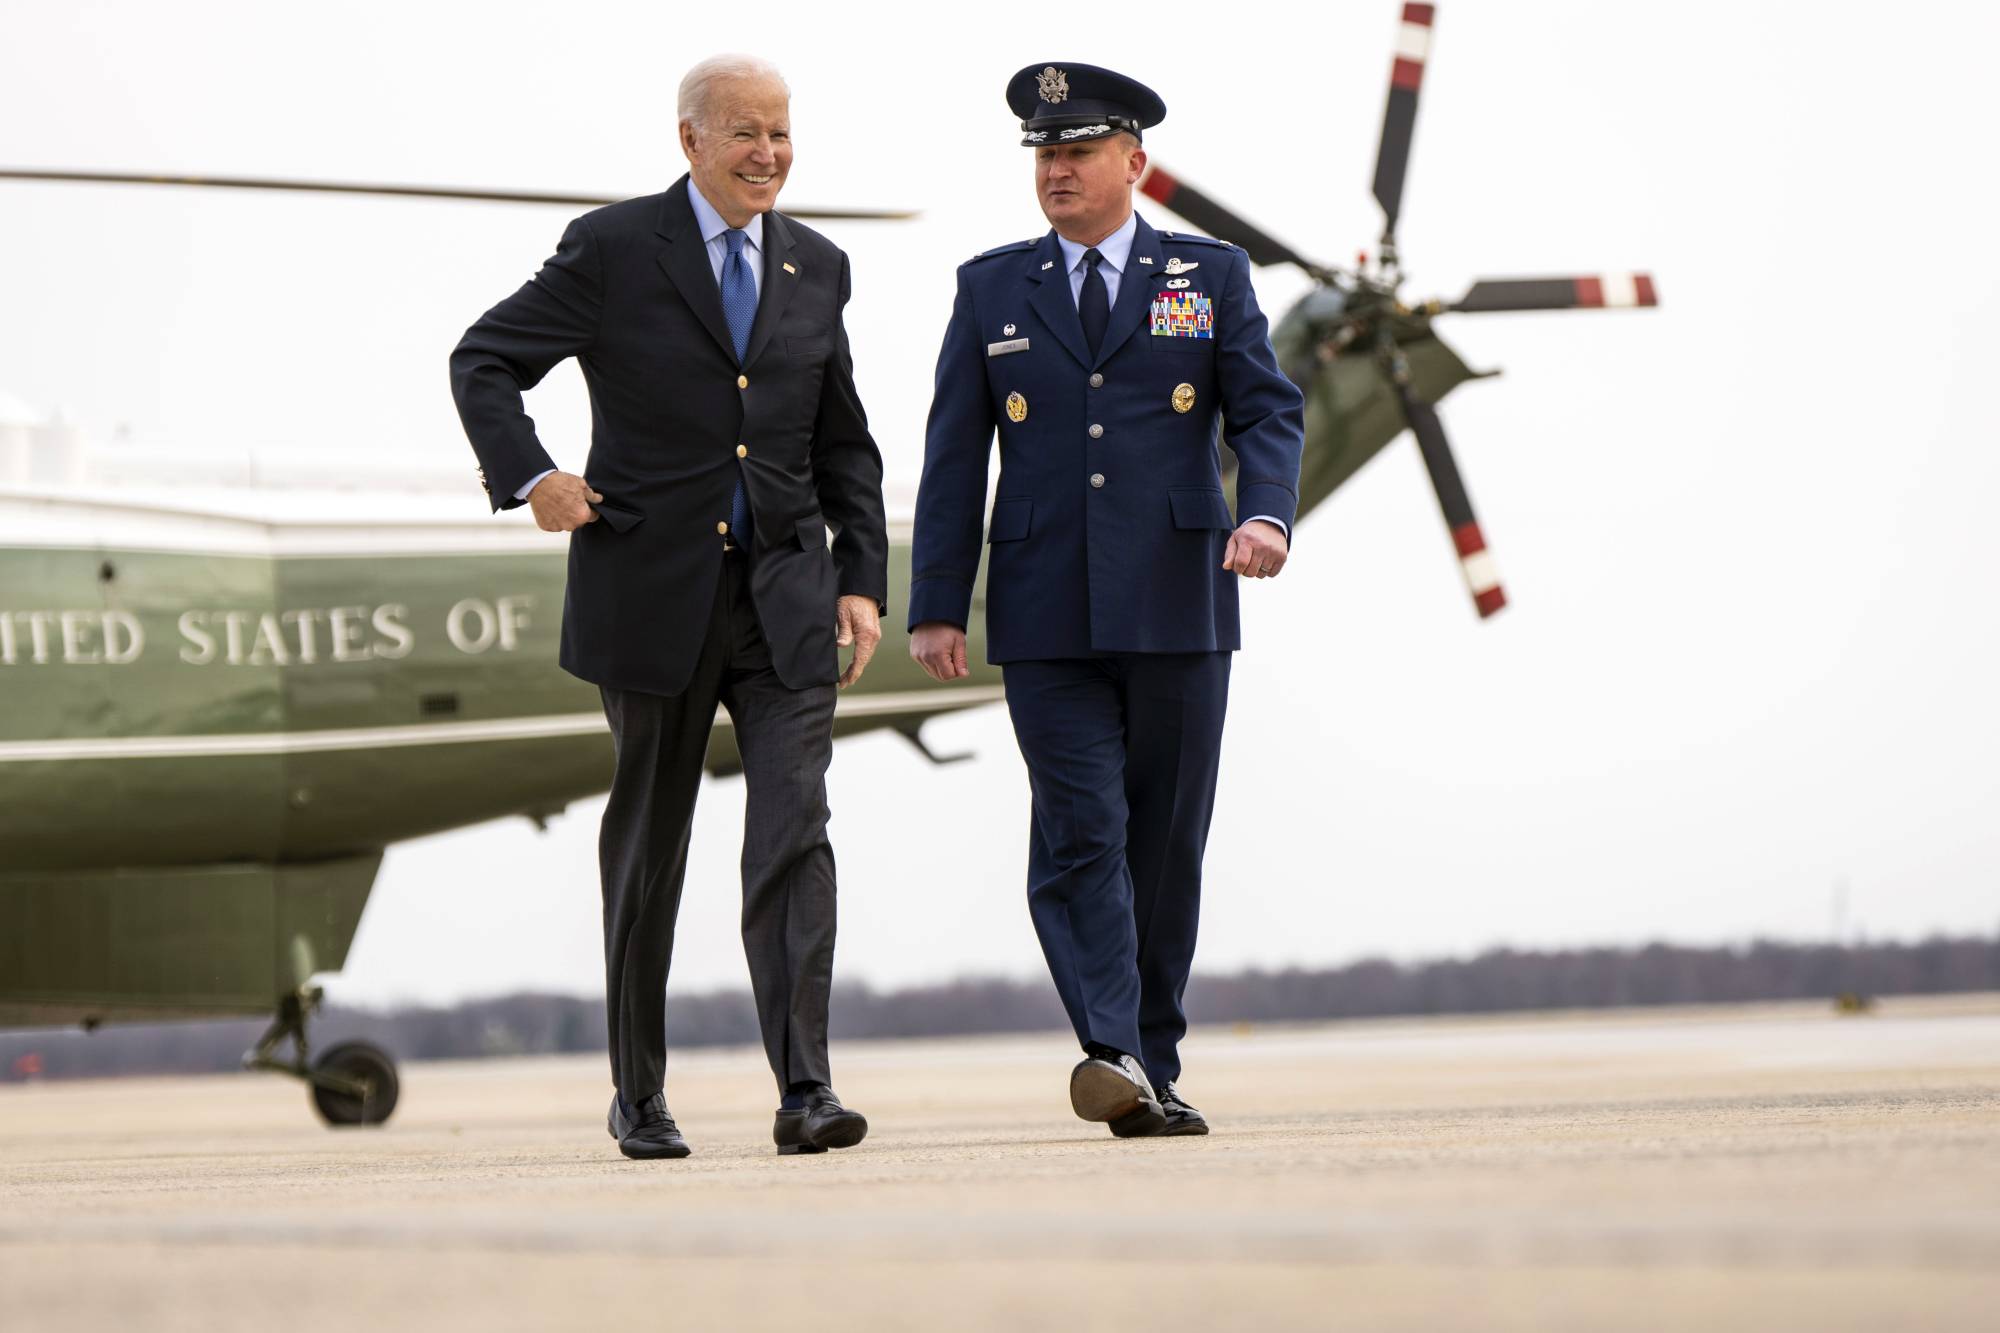 U.S. President Joe Biden stops heads to Air Force One at Joint Base Andrews in Maryland for a trip to Europe on Wednesday morning, March 23, 2022. Biden is to land in Brussels on Wednesday evening and he is set to announce new sanctions on Russian lawmakers before meeting with NATO allies and the European Union before traveling to Poland later in the week.  | DOUG MILLS / THE NEW YORK TIMES